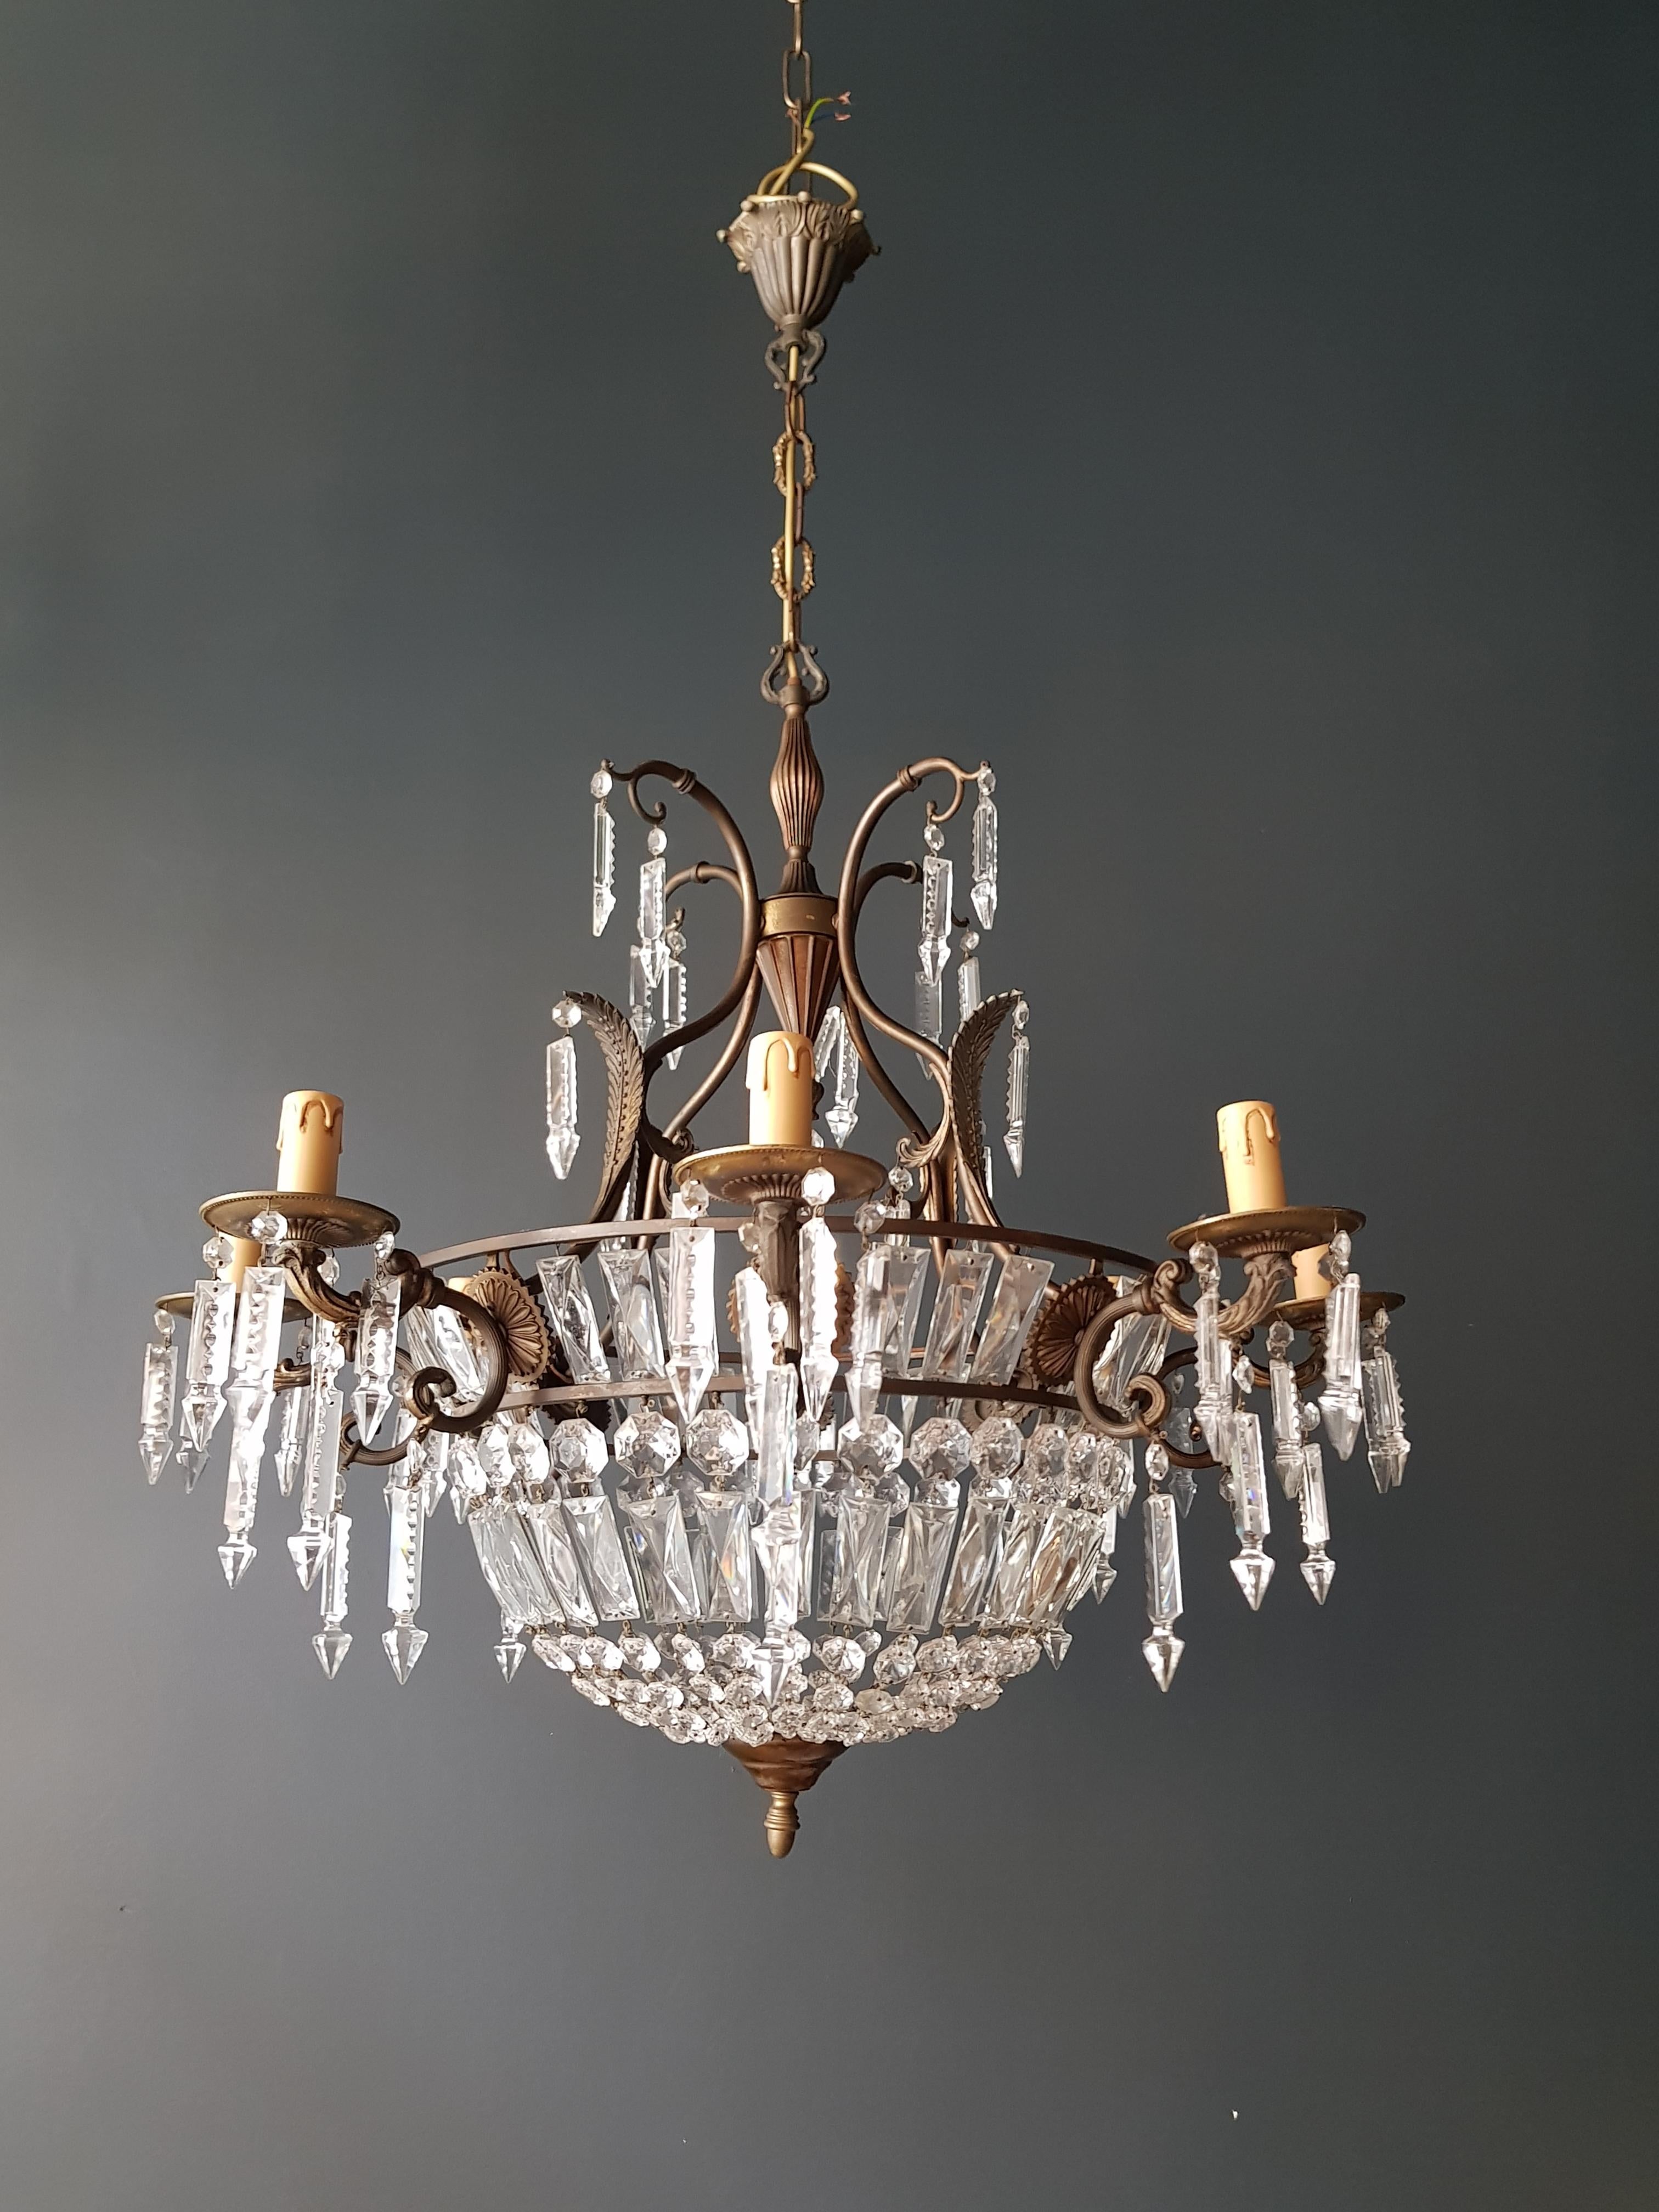 Original preserved chandelier, circa 1950. Cabling and sockets completely renewed. Crystal hand knotted
Measures: Total height: 99 cm, height without chain: 72 cm, diameter 75 cm, weight (approximately) 8kg.

Number of lights: 8 -light Bulub